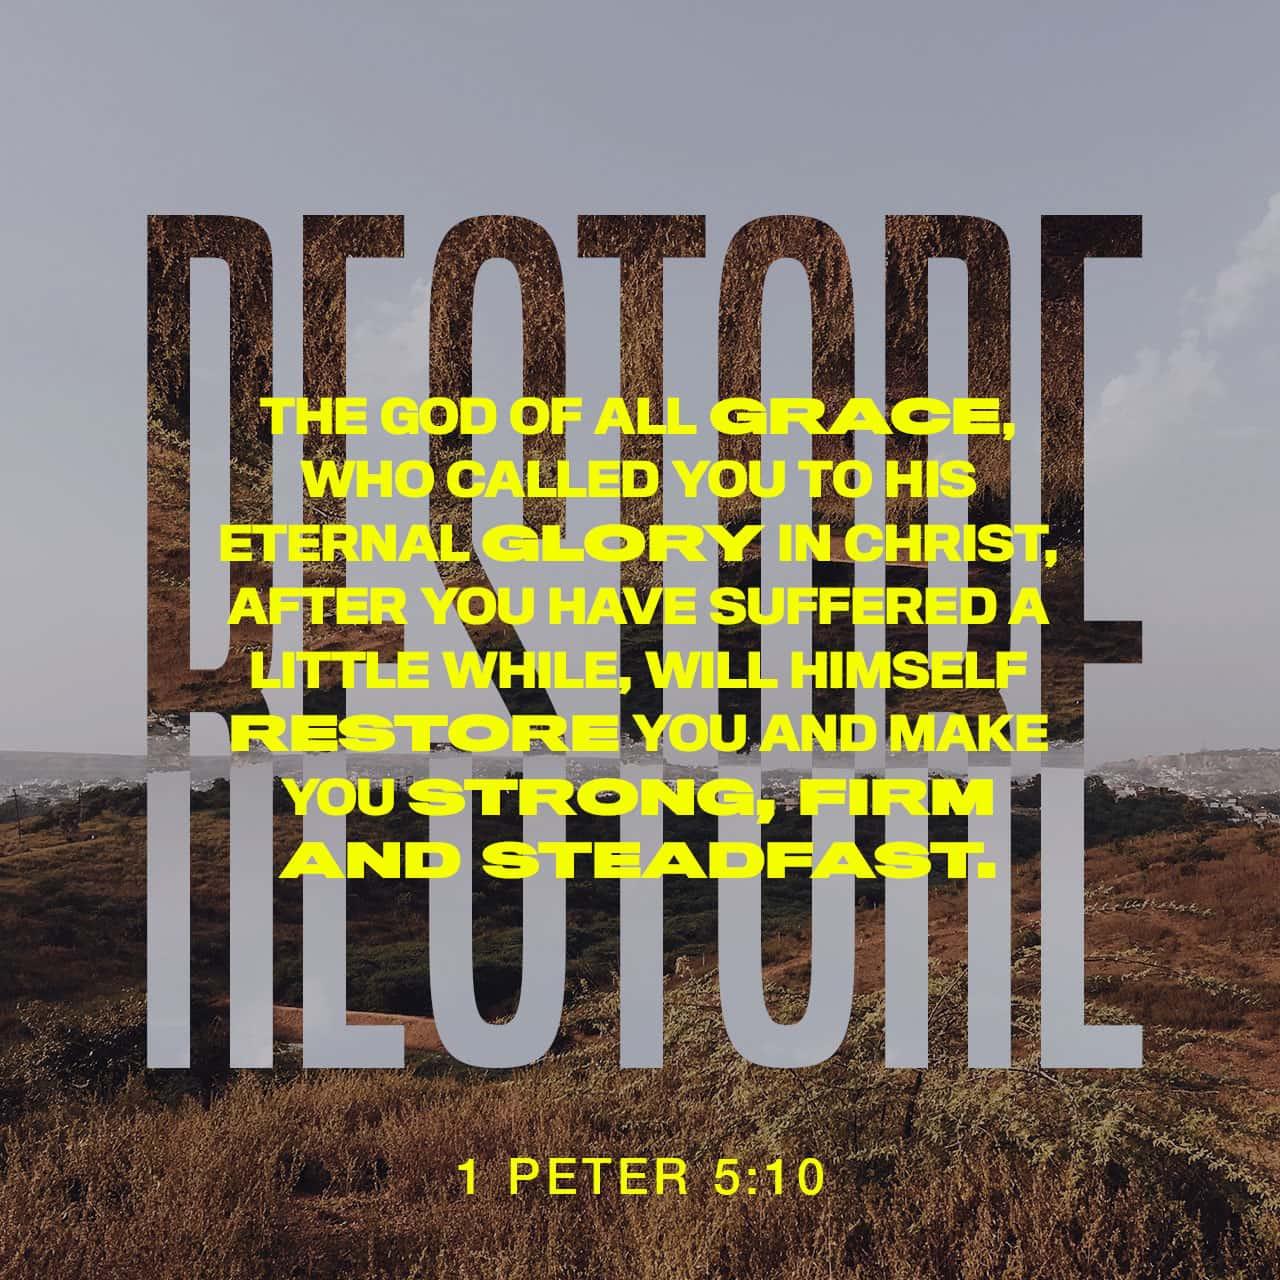 Bible Verse of the Day - day 81 - image 68496 (1 Peter 5:10)